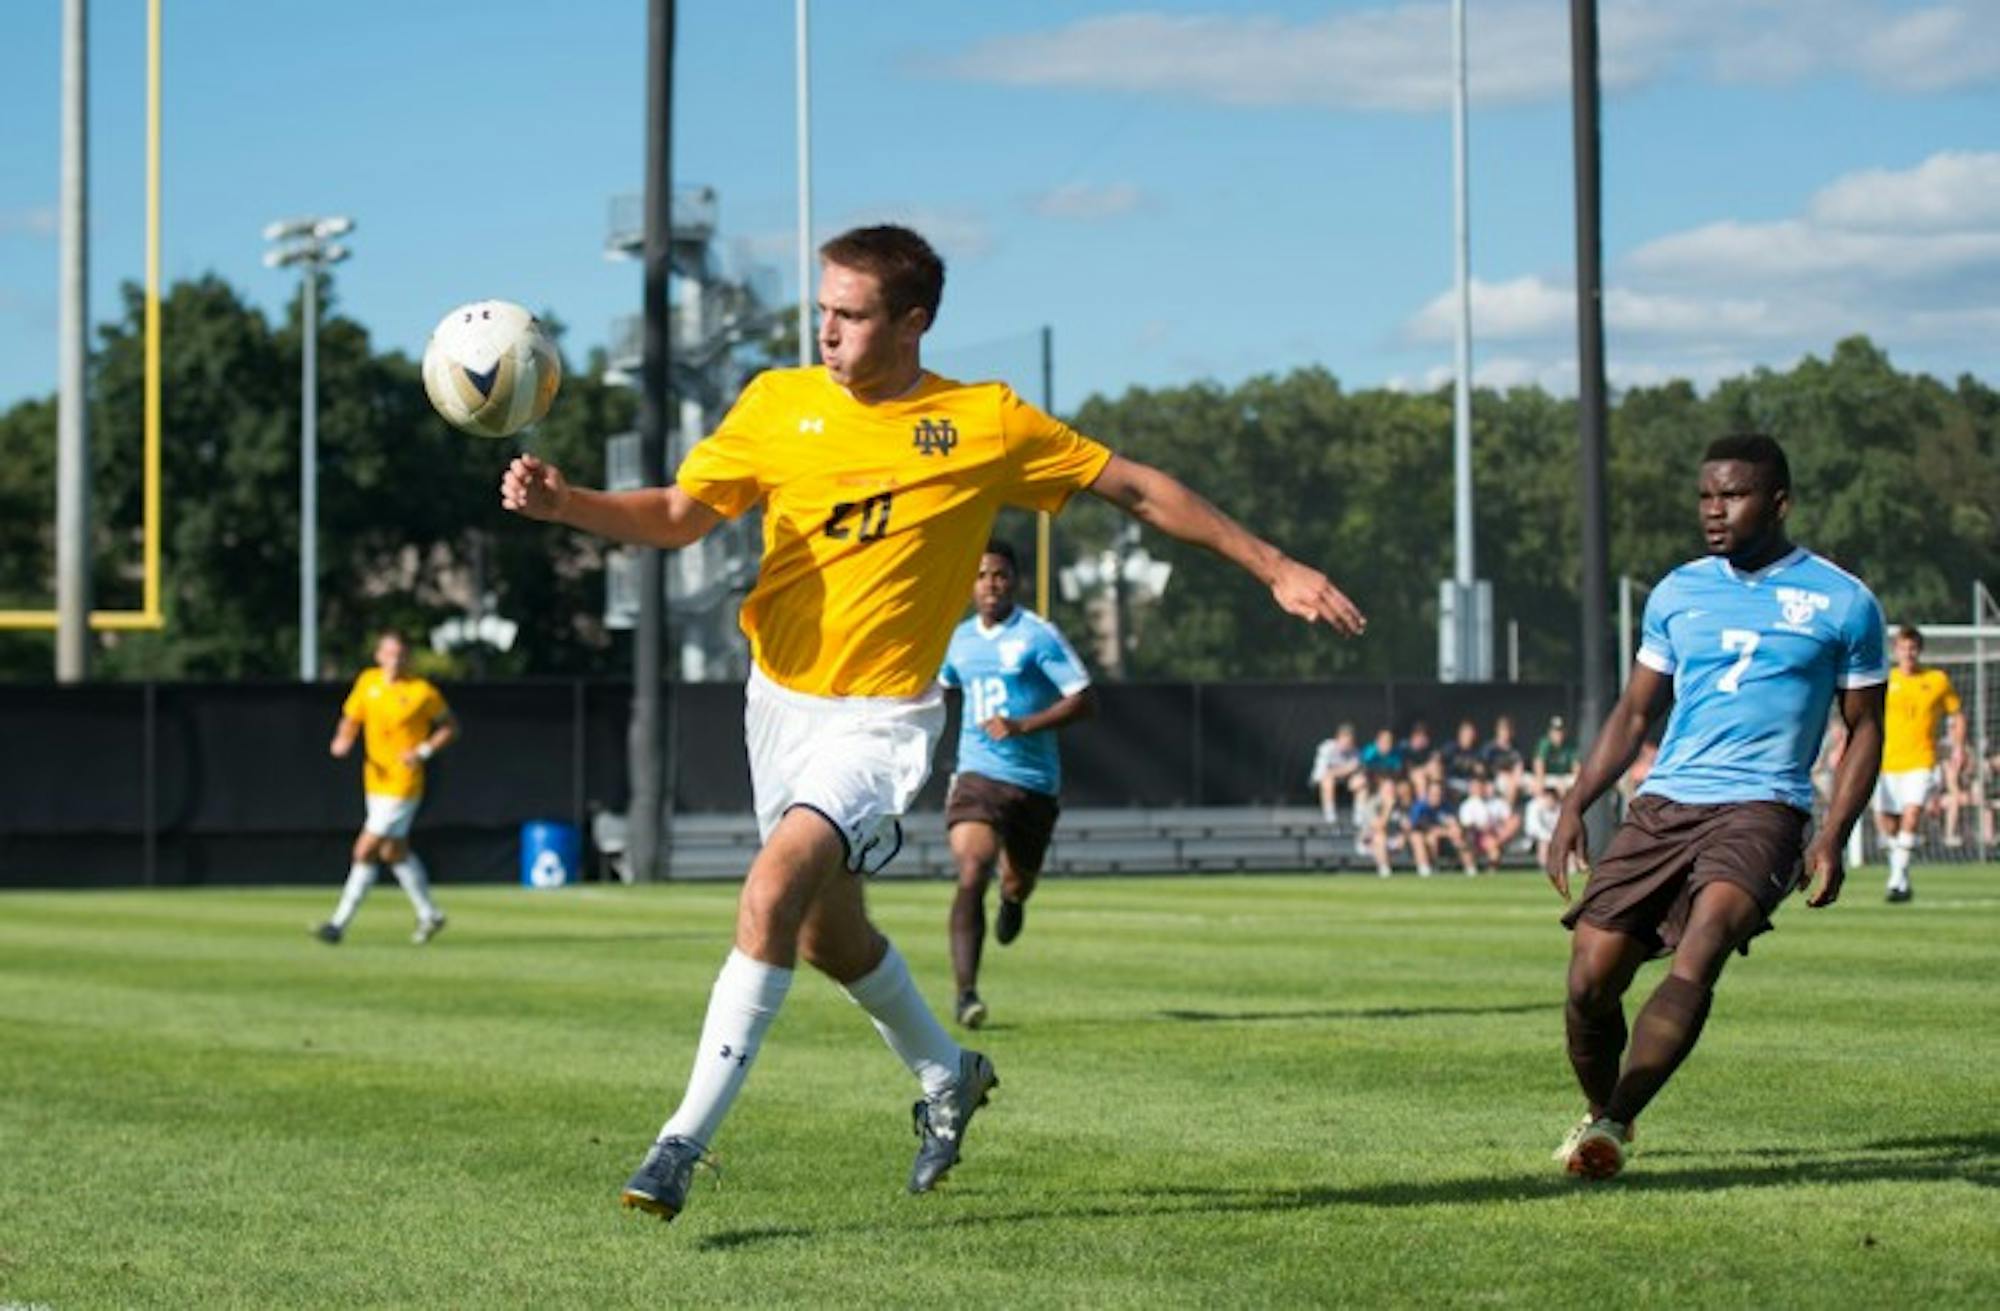 Junior defender Blake Townes plays the ball during Notre Dame’s 1-1 tie versus Valparaiso at Alumni Stadium on Monday. The Irish closed out their preseason schedule with the stalemate.